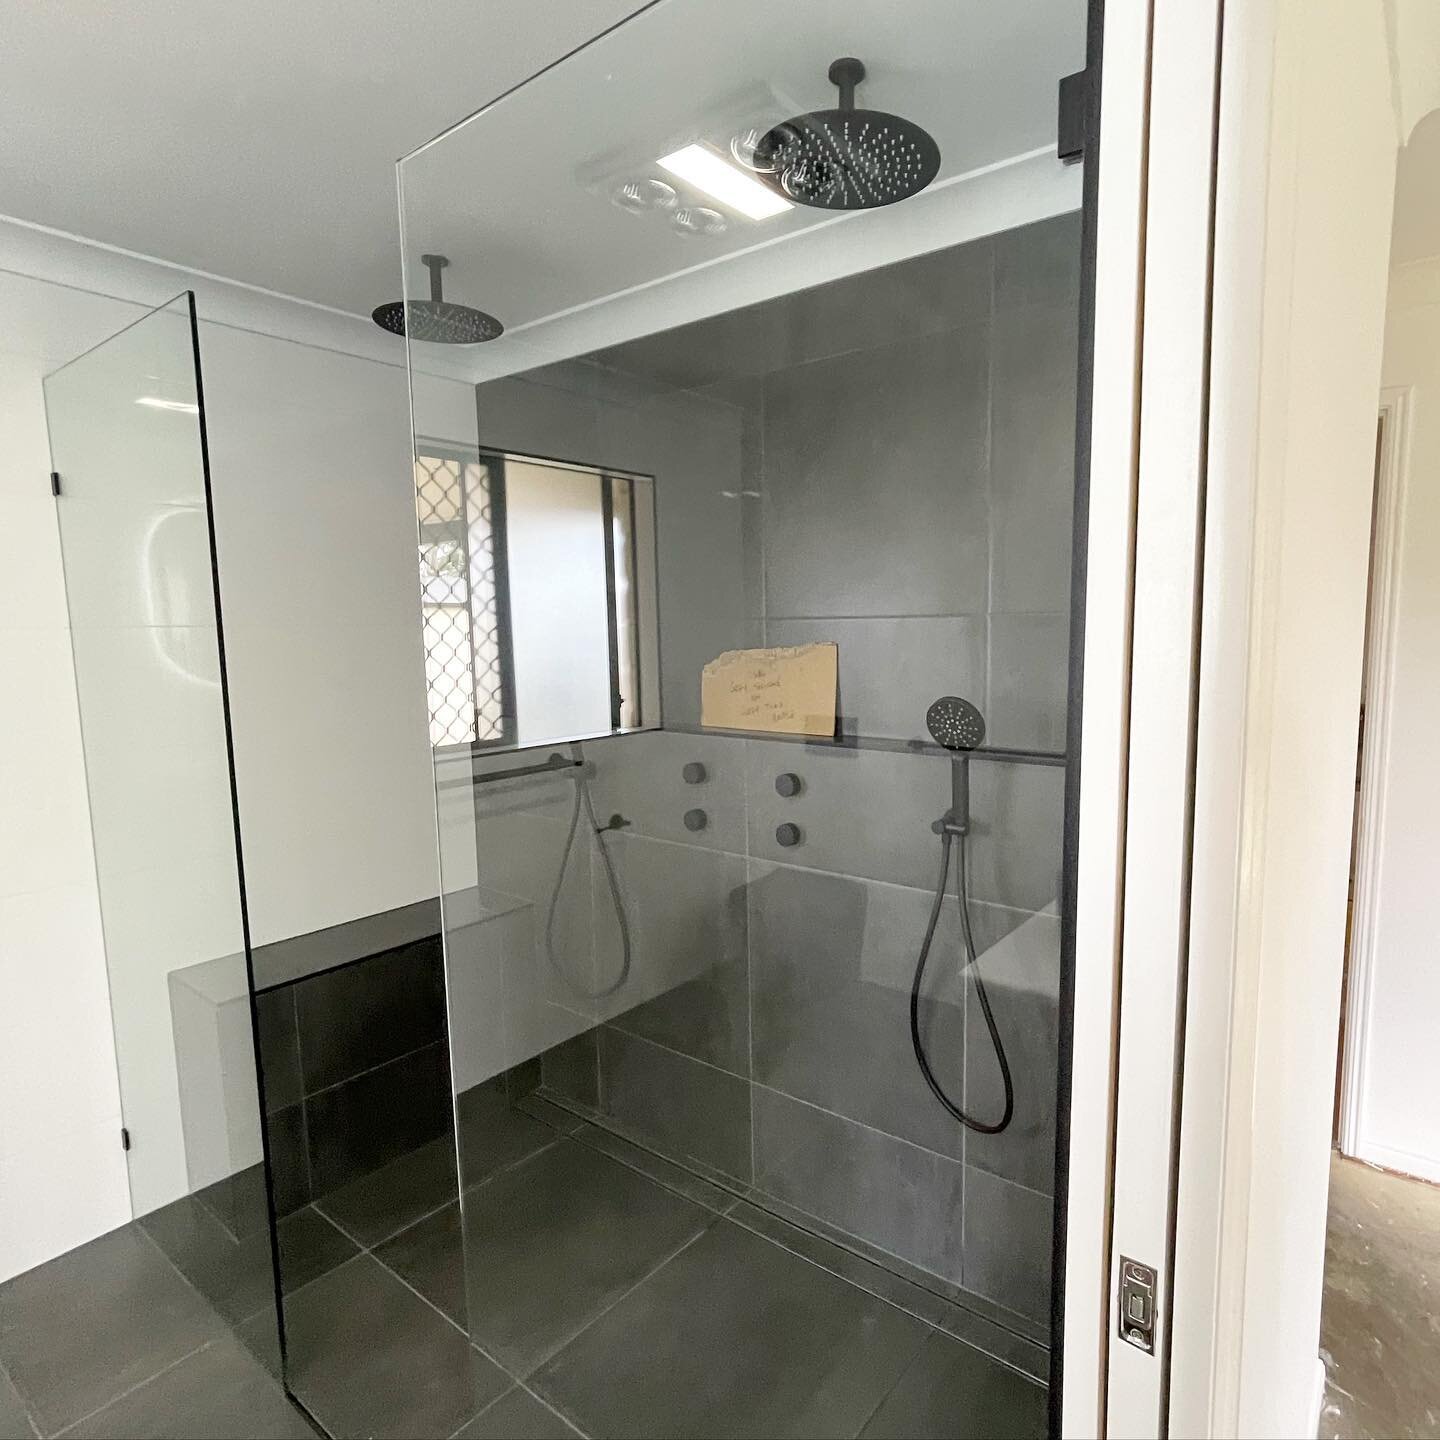 Check out this stunning walk-in shower by Gold Star Bathrooms! 😍😍 

We recently installed double shower heads on each side, creating a luxurious and functional space that is perfect for couples or families.

The shower features sleek and modern mat